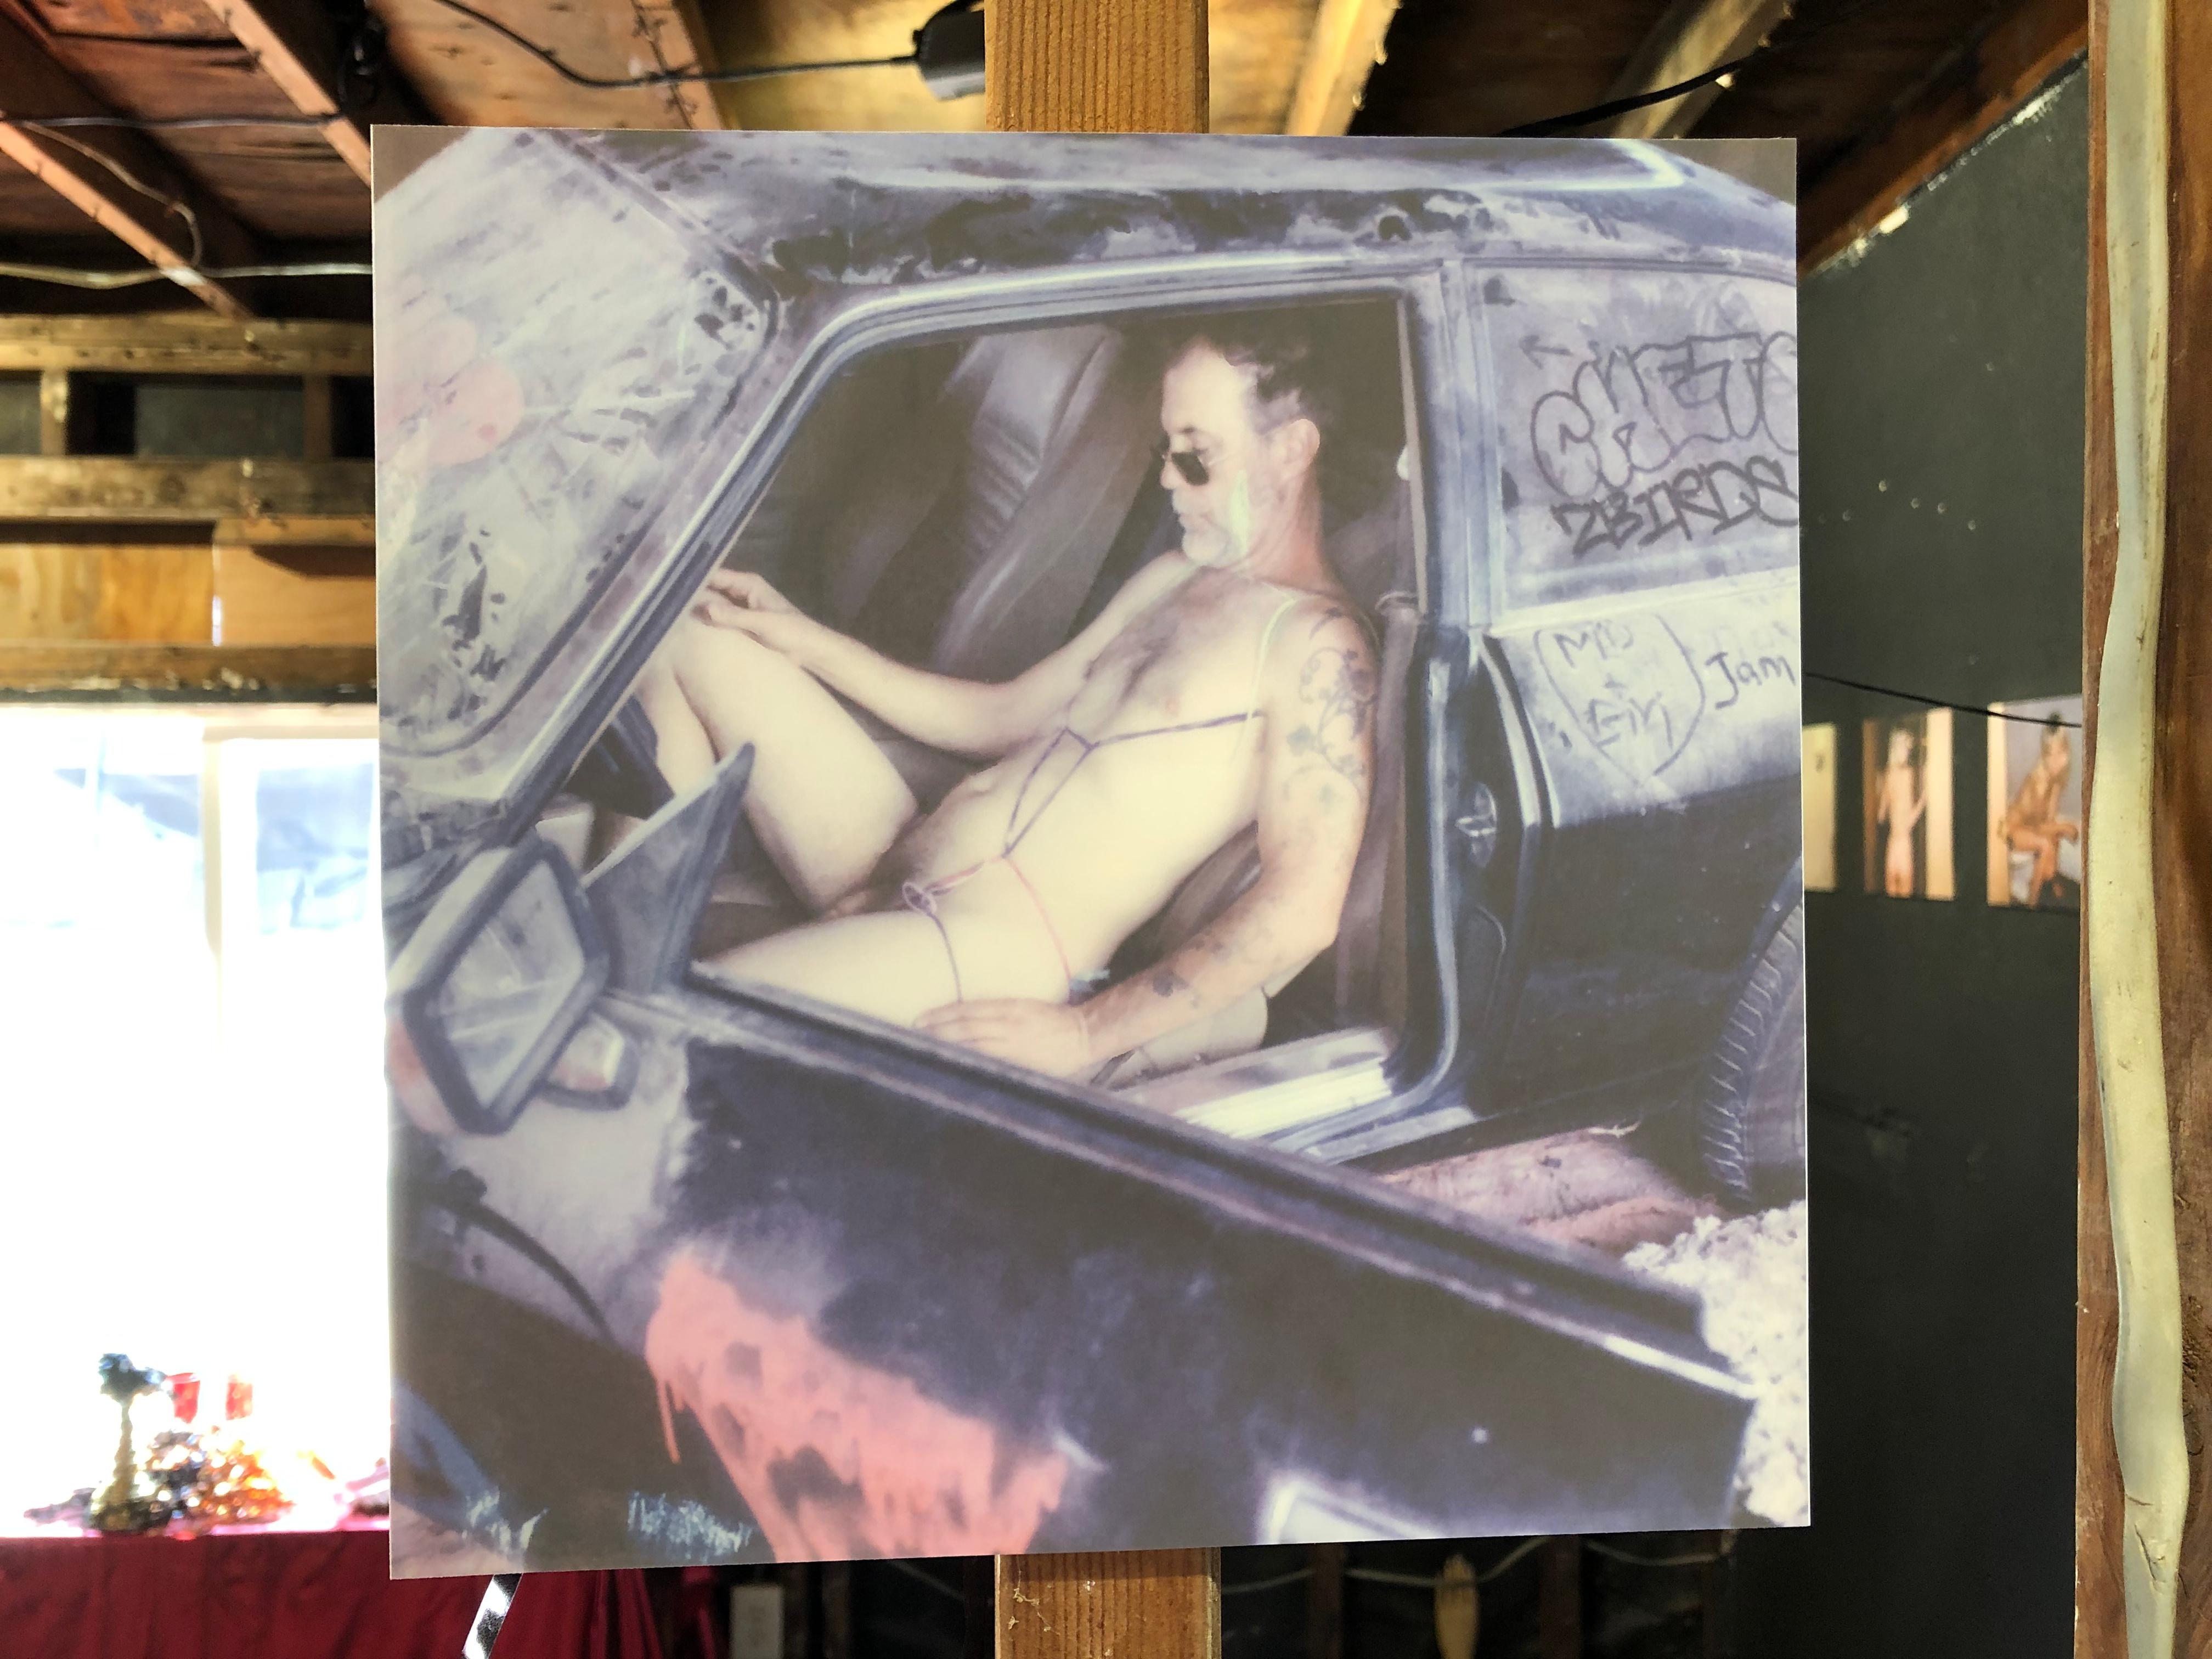 Dude (where's my car) from The crazy Adventures of David C. - Contemporary, Nude - Photograph by Kirsten Thys van den Audenaerde